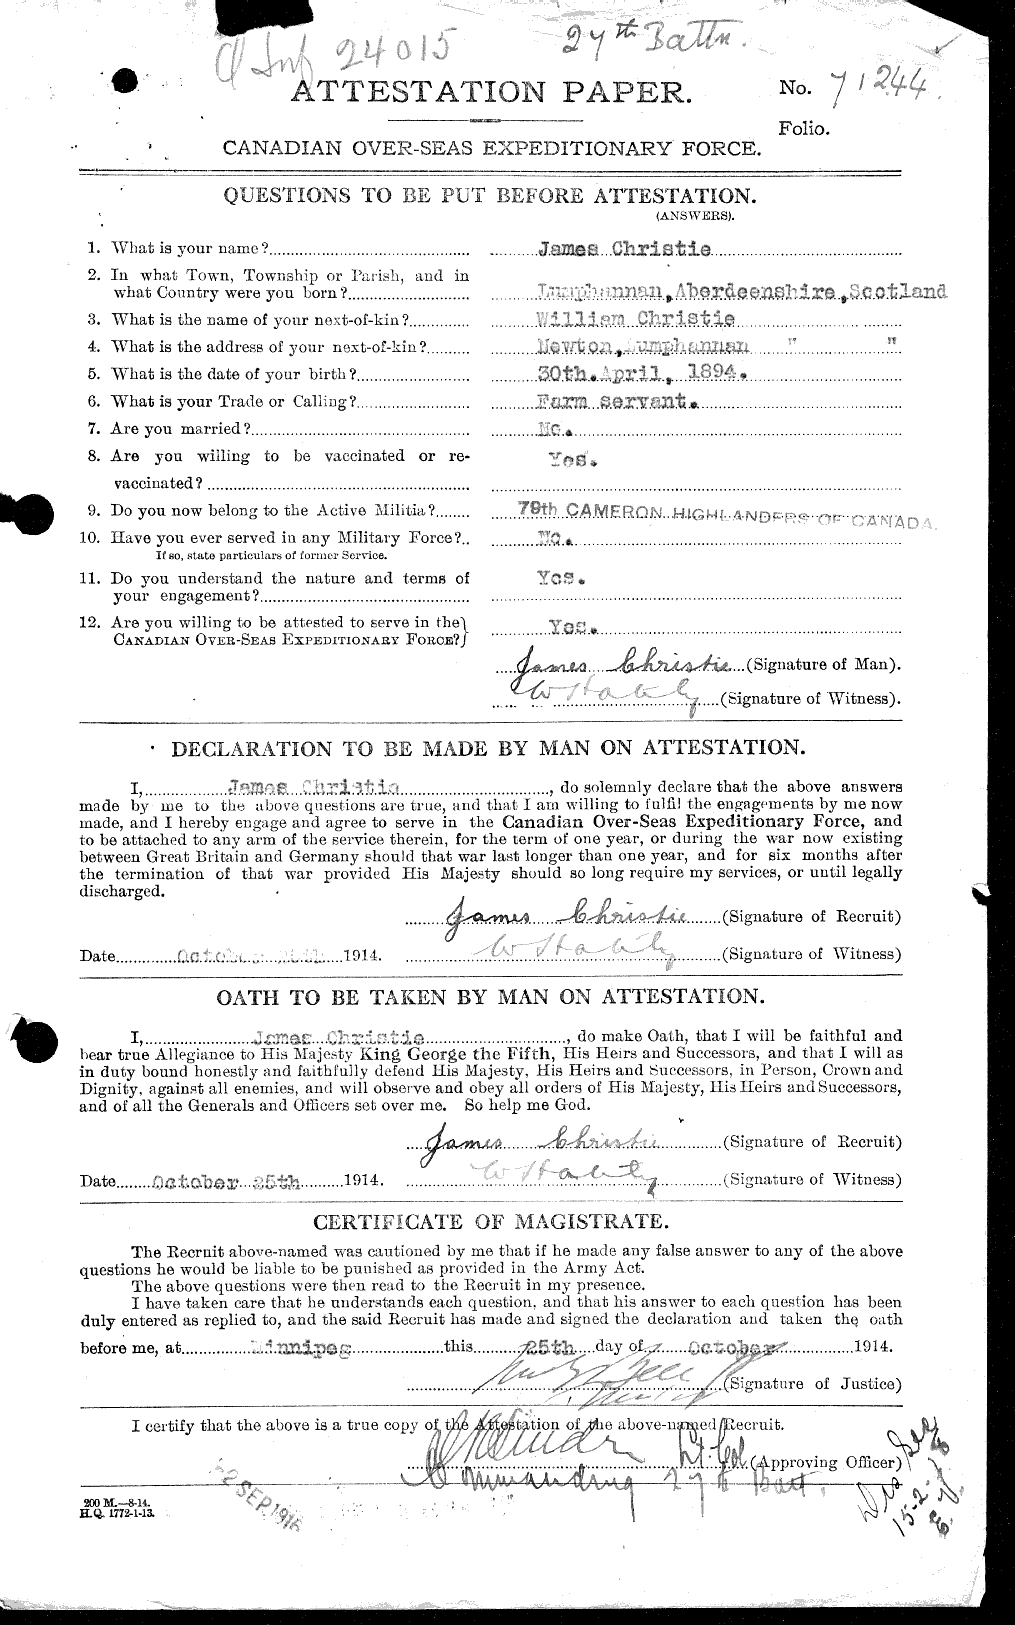 Personnel Records of the First World War - CEF 021971a